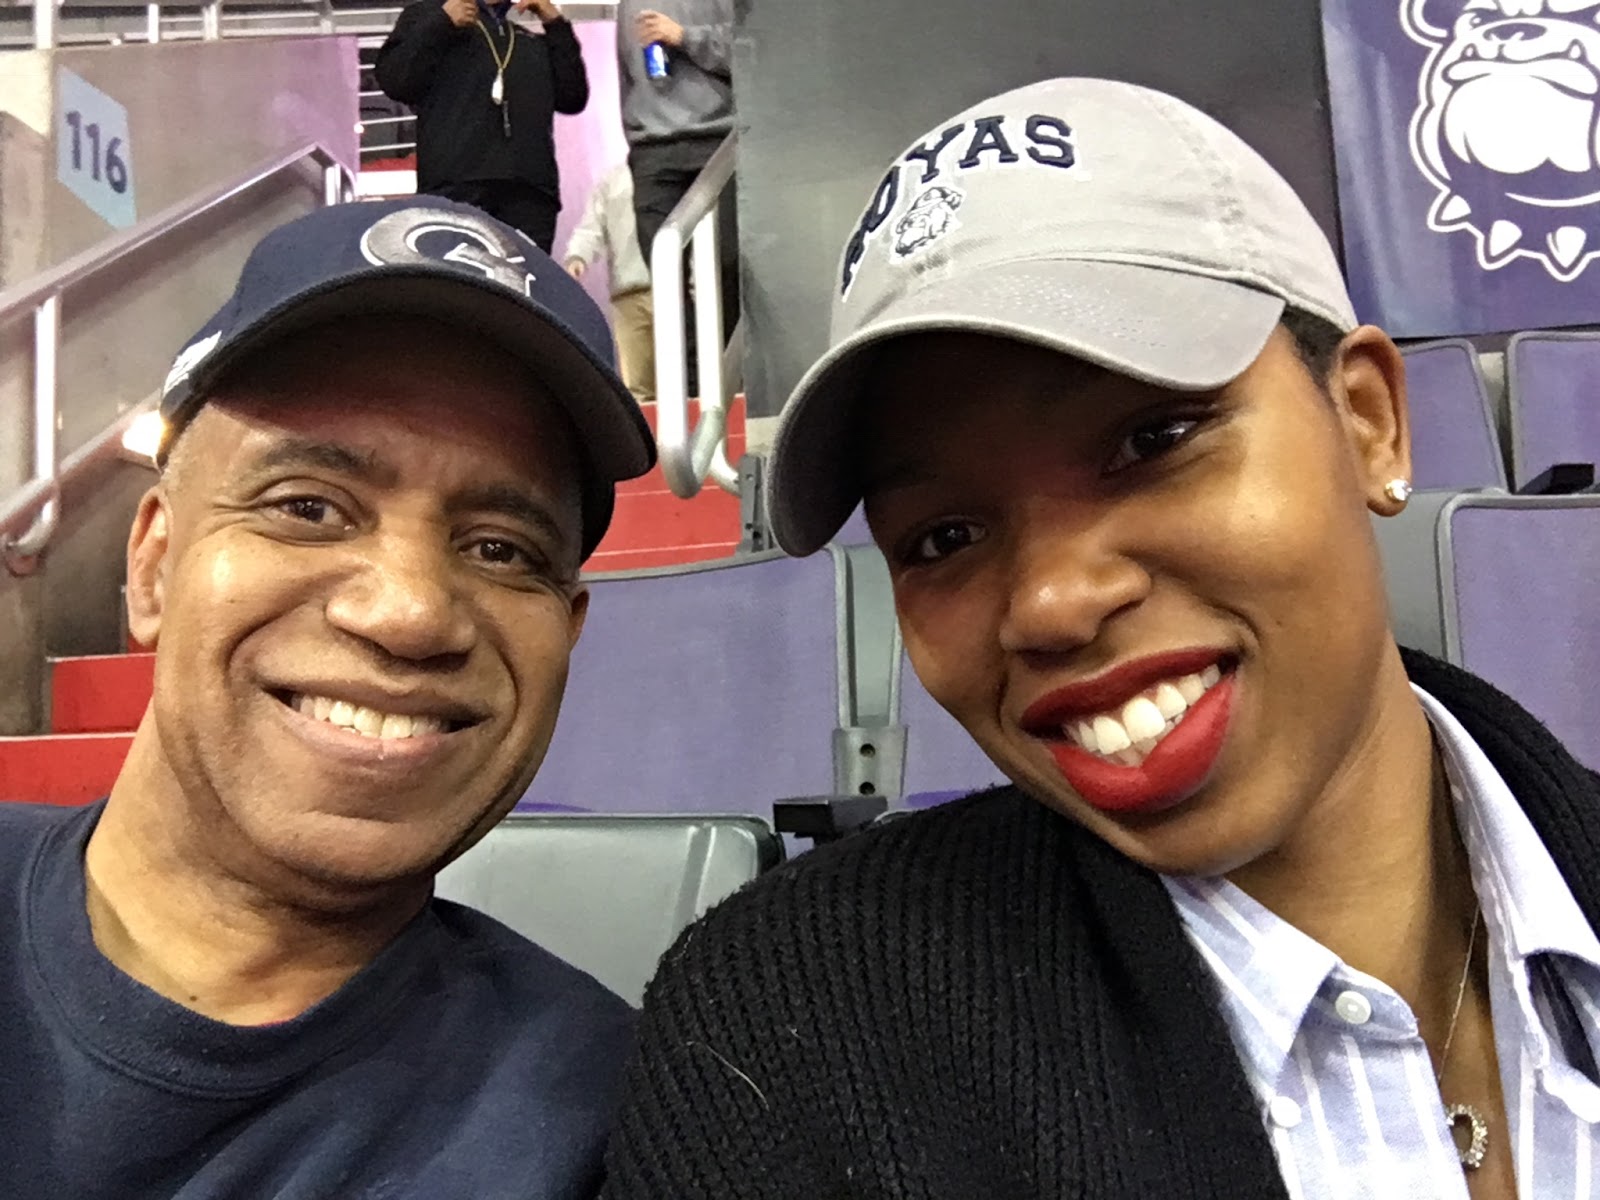 Kevin McNutt (in a blue t-shirt and blue hat with a "G") sitting next to his daughter, Monica McNutt (wearing a blue collared shirt with white stripes, a black cardigan, and a grey "Hoyas" hat) at a Georgetown University basketball game.